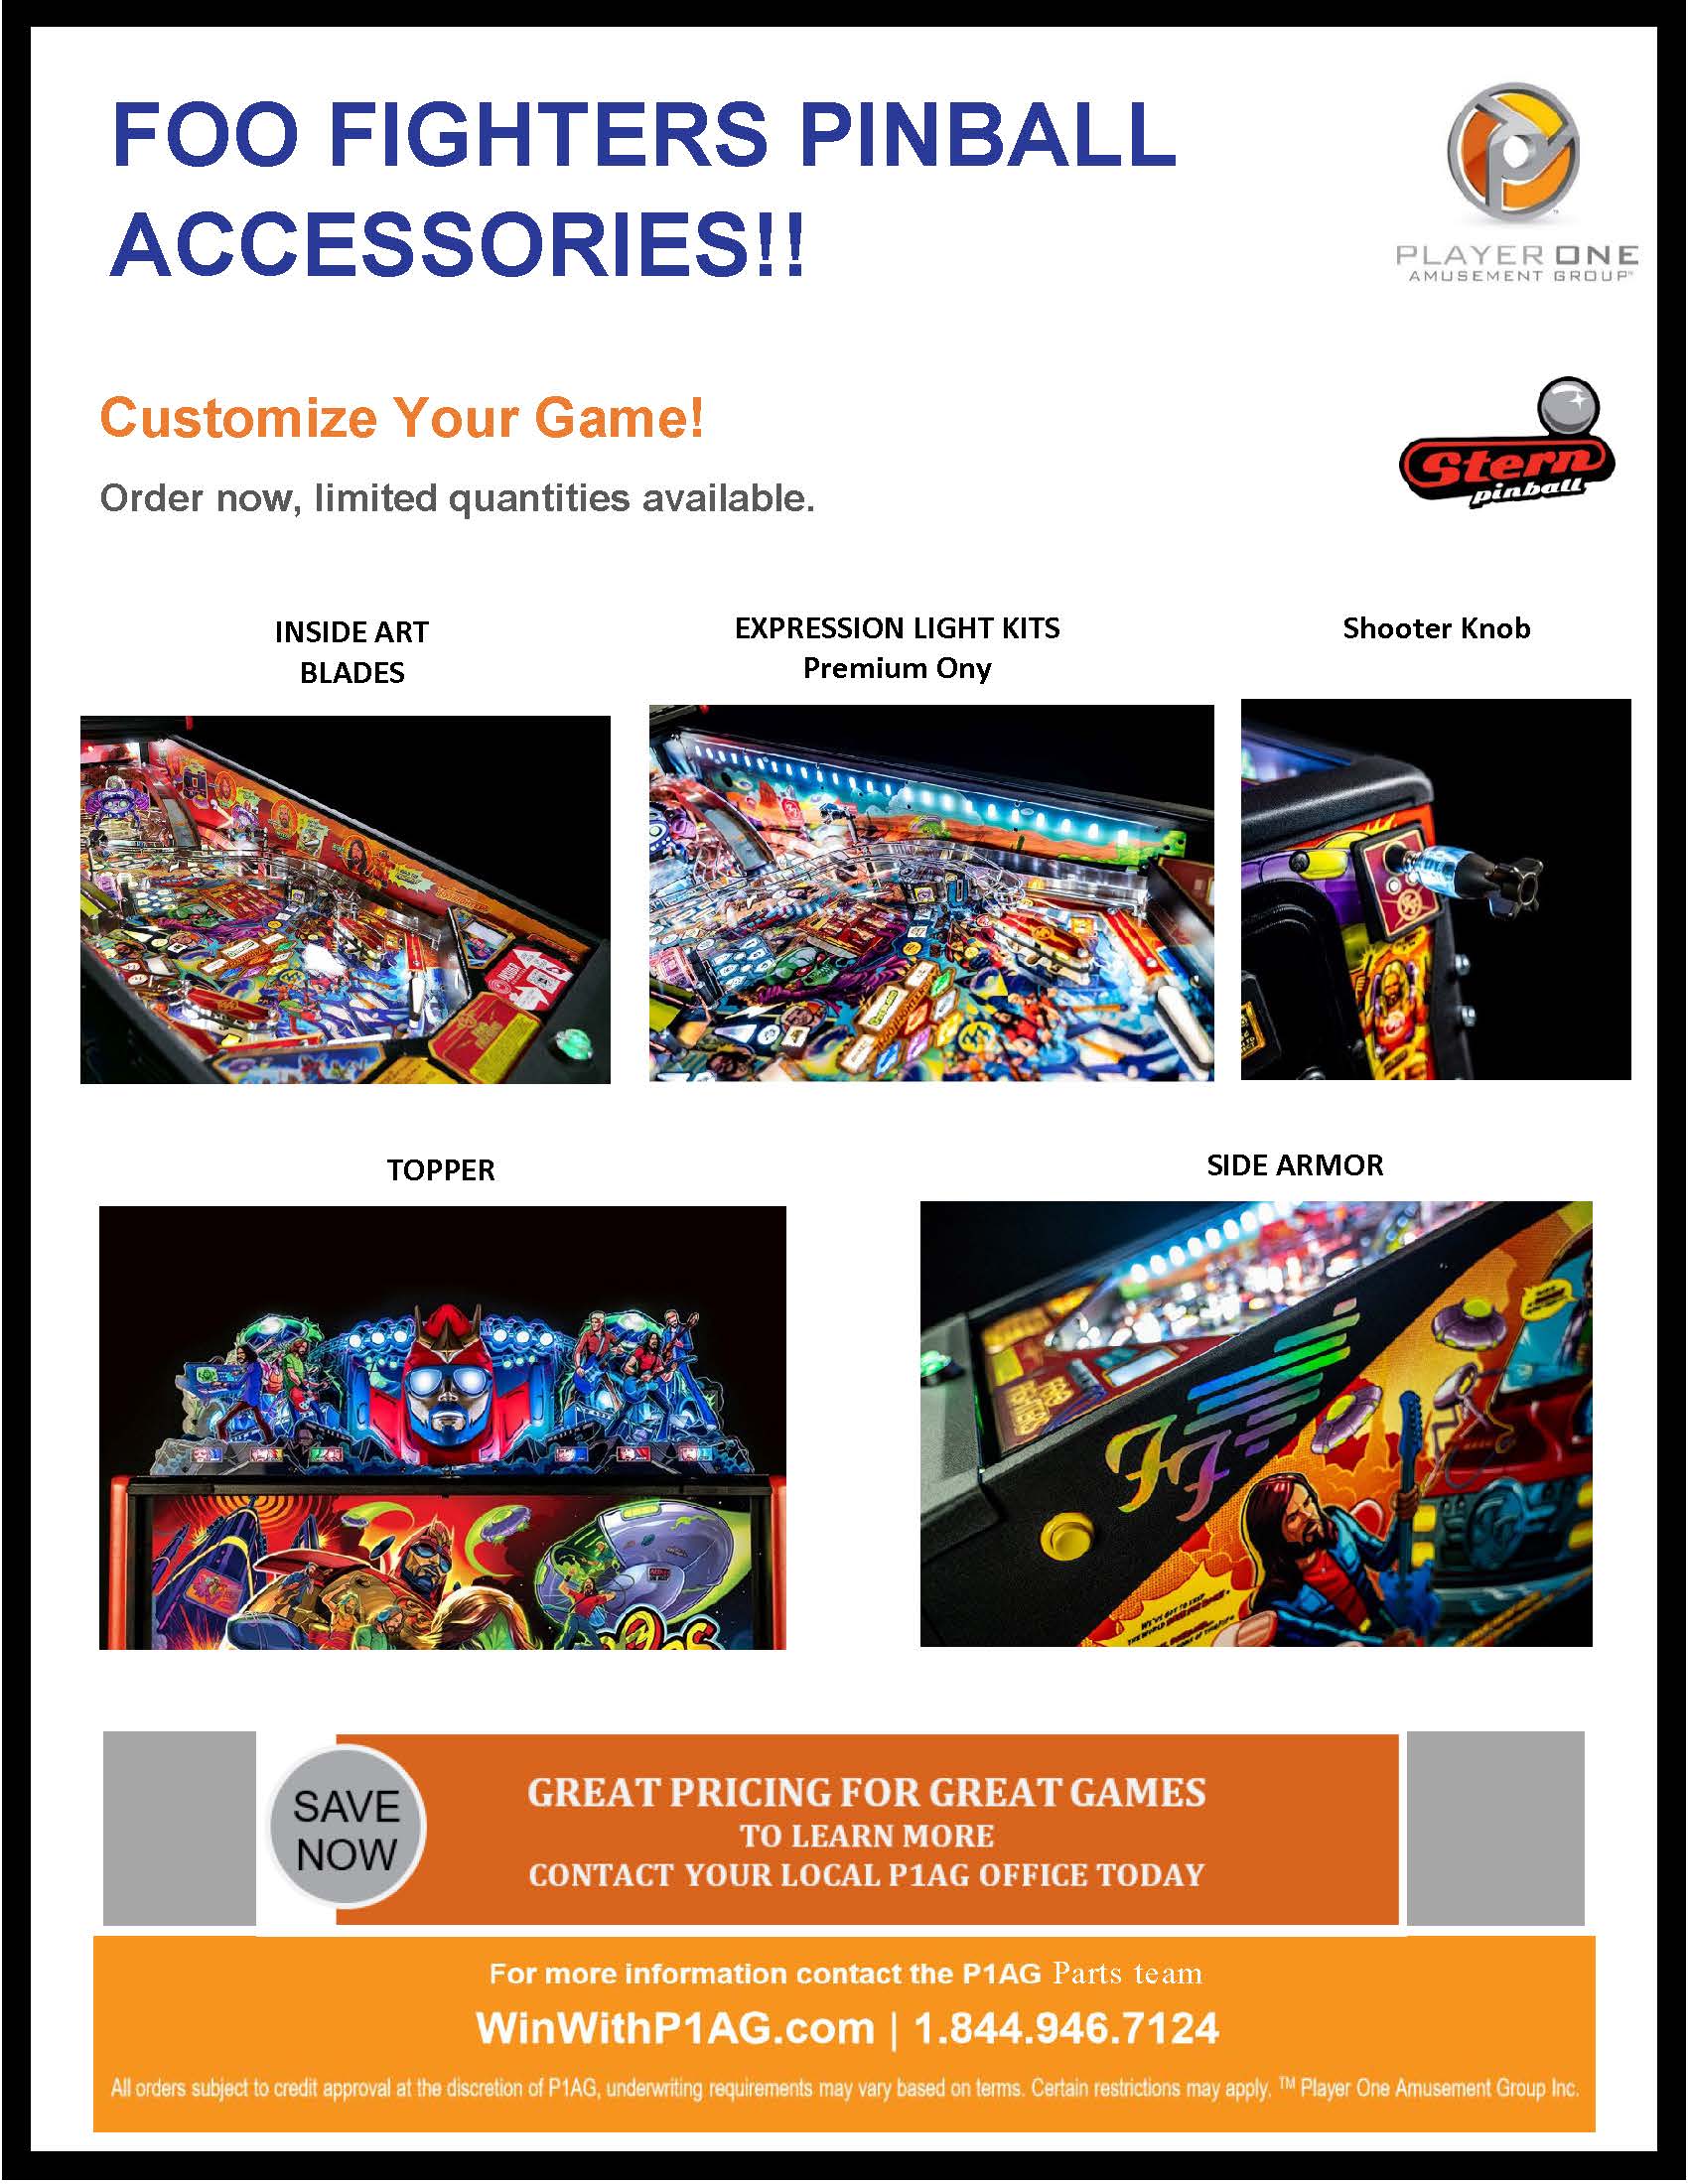 Foo Fighters Pinball Accessories